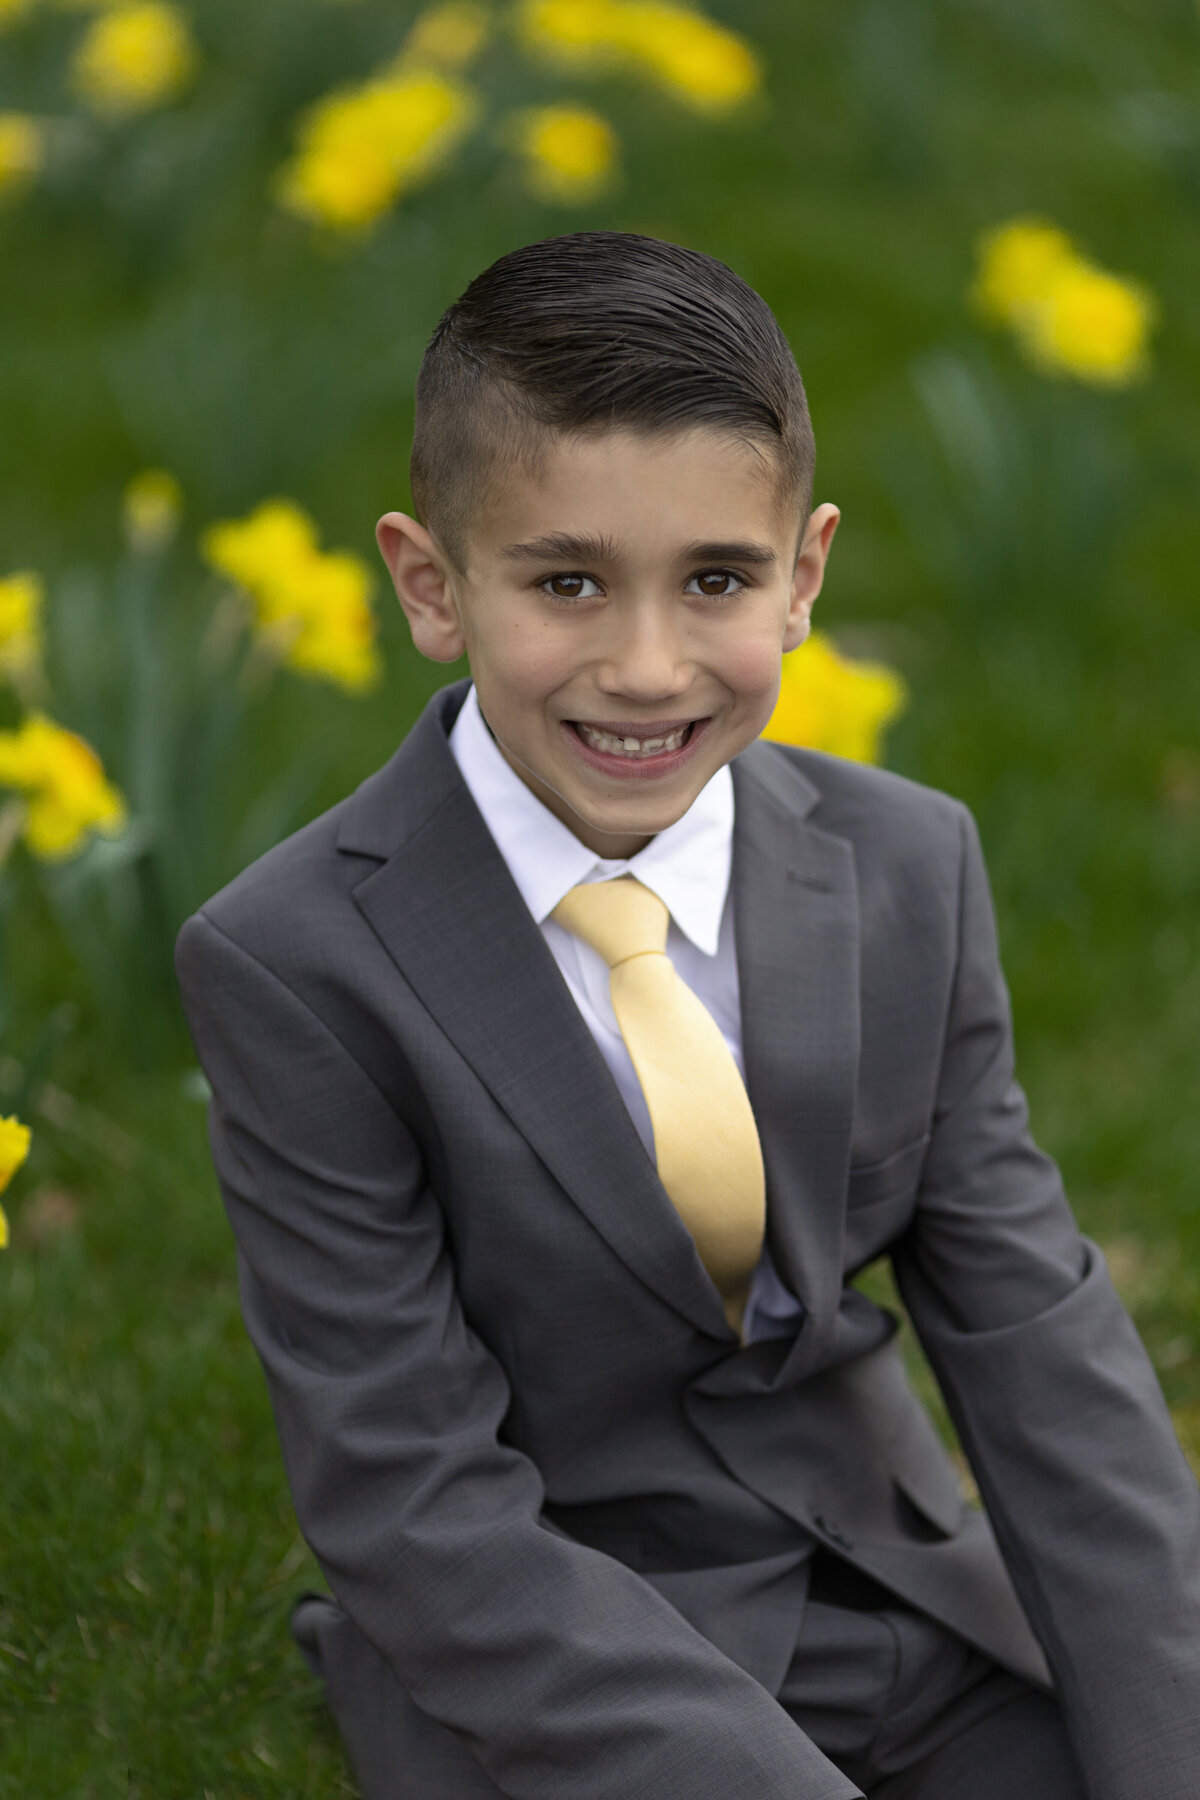 A young boy sits in a lawn with wild daffodils in a grey suit and gold tie